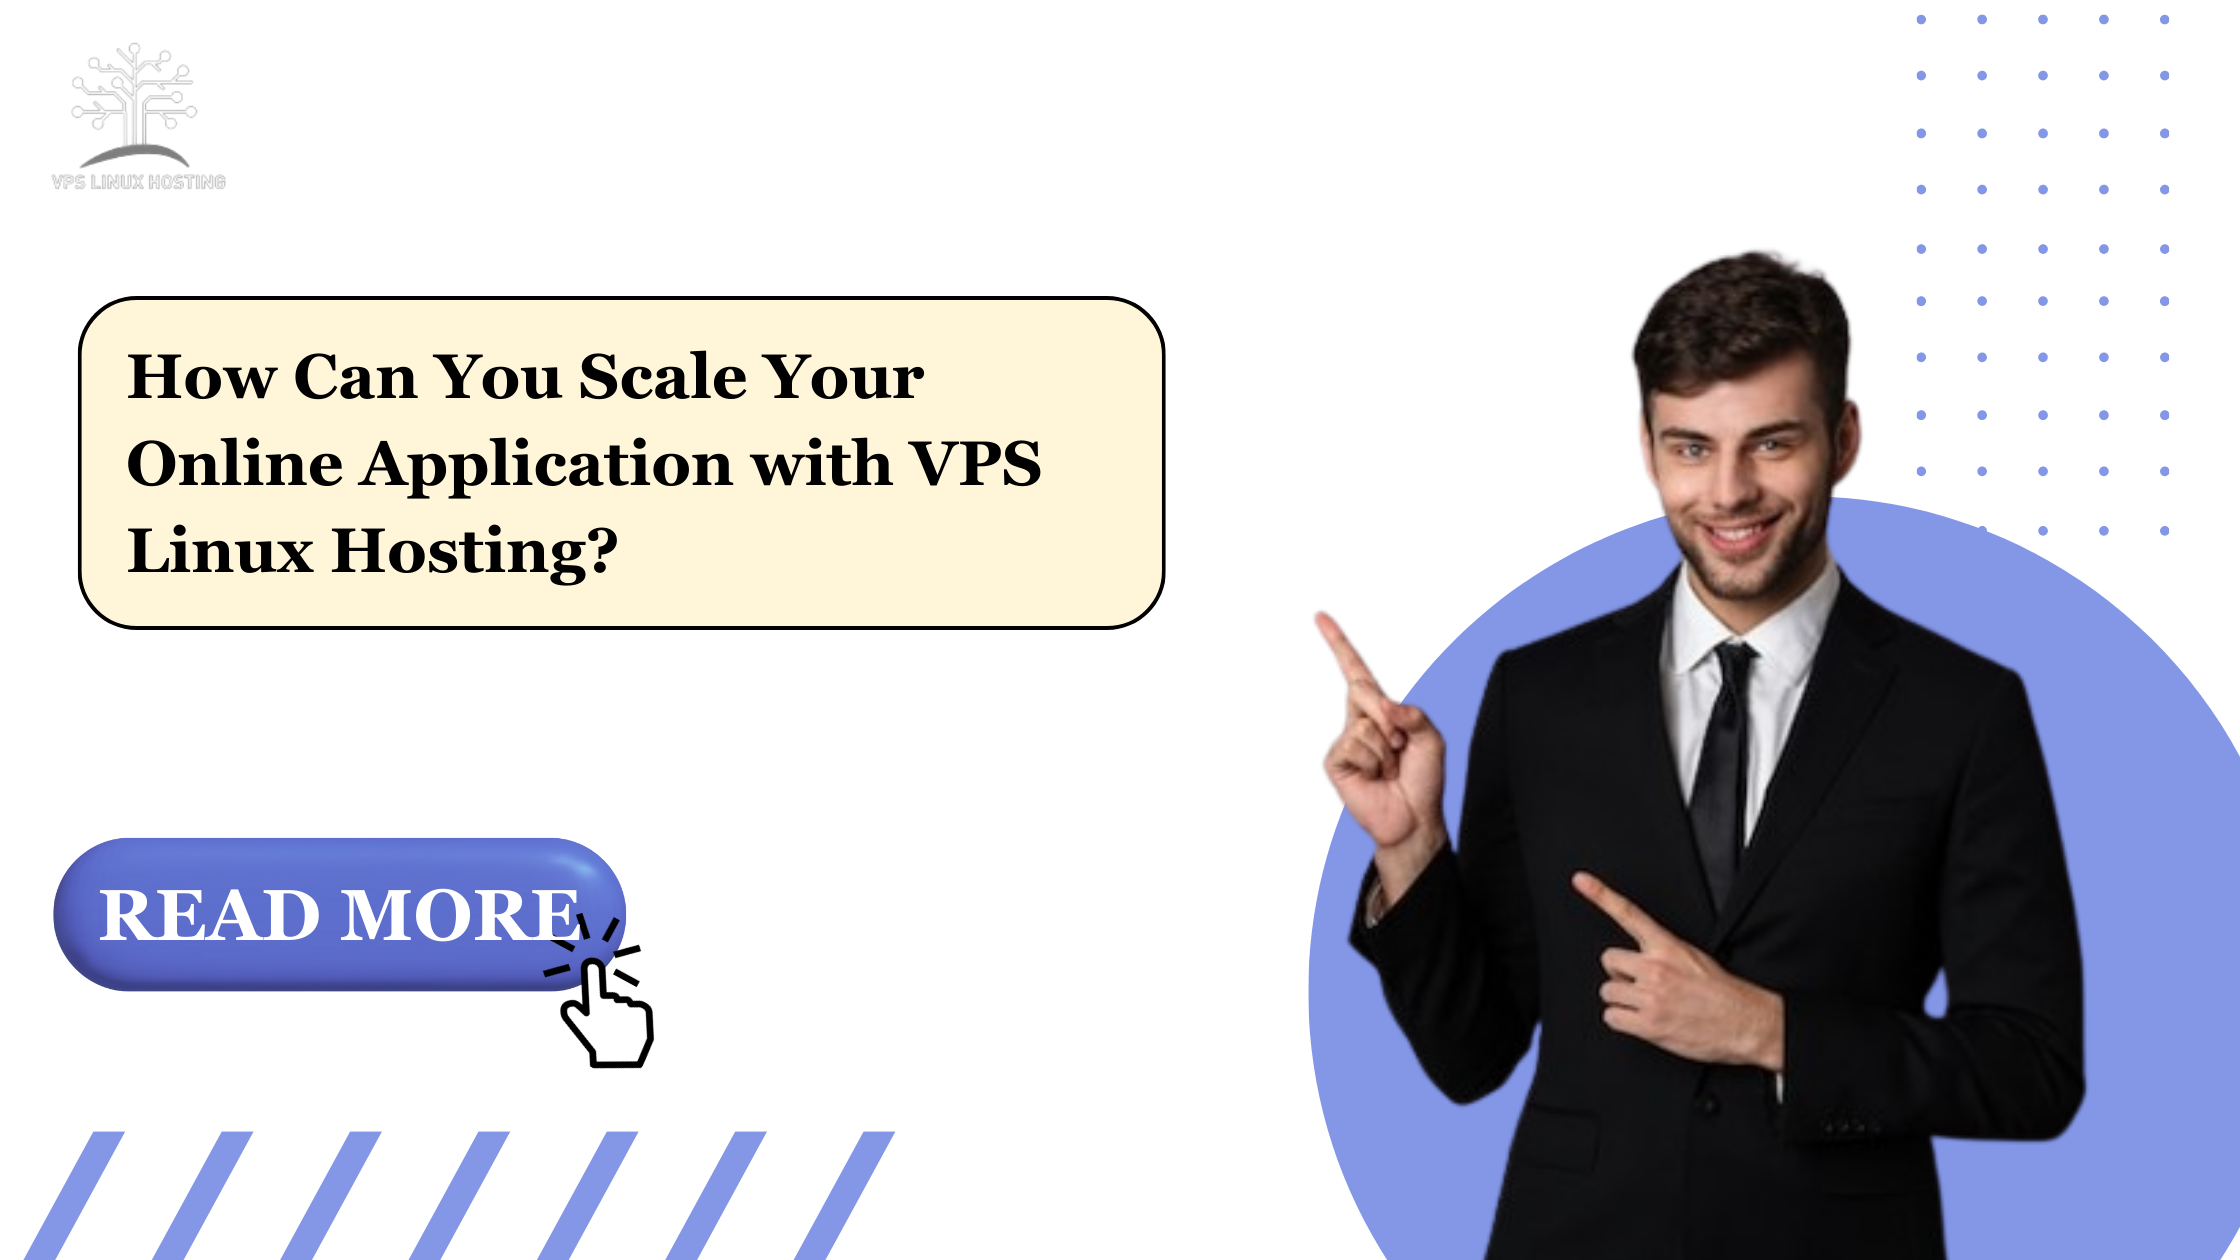 How Can You Scale Your Online Application with VPS Linux Hosting?